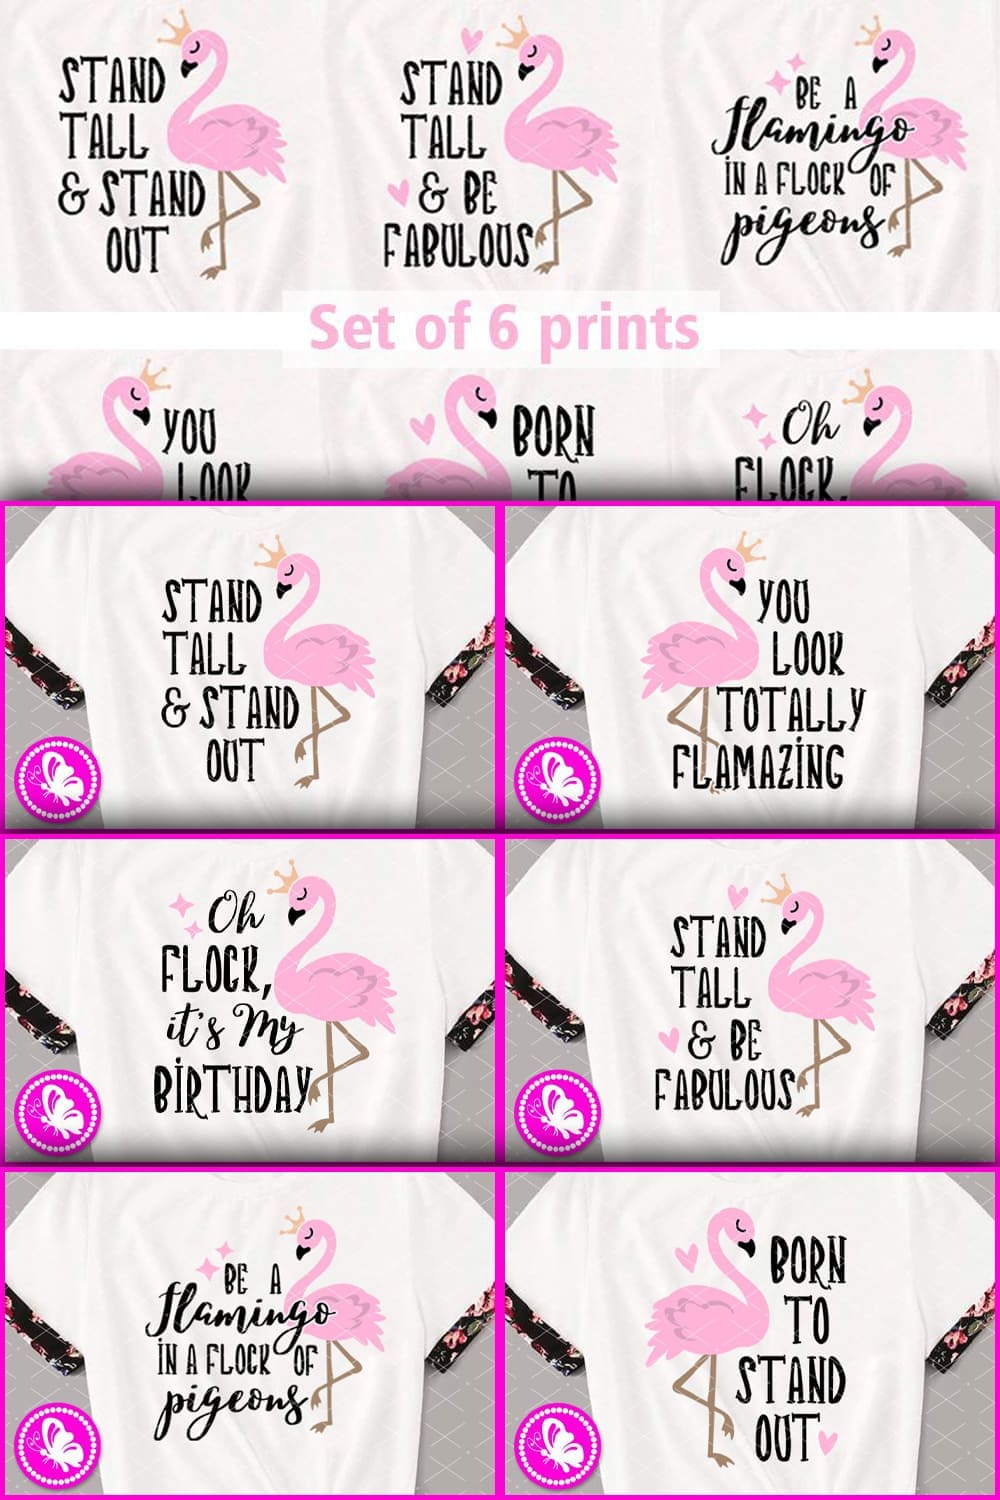 Bundle pink flamingo quotes sayings birthday t-shirt, picture for Pinterest 1000x1500.